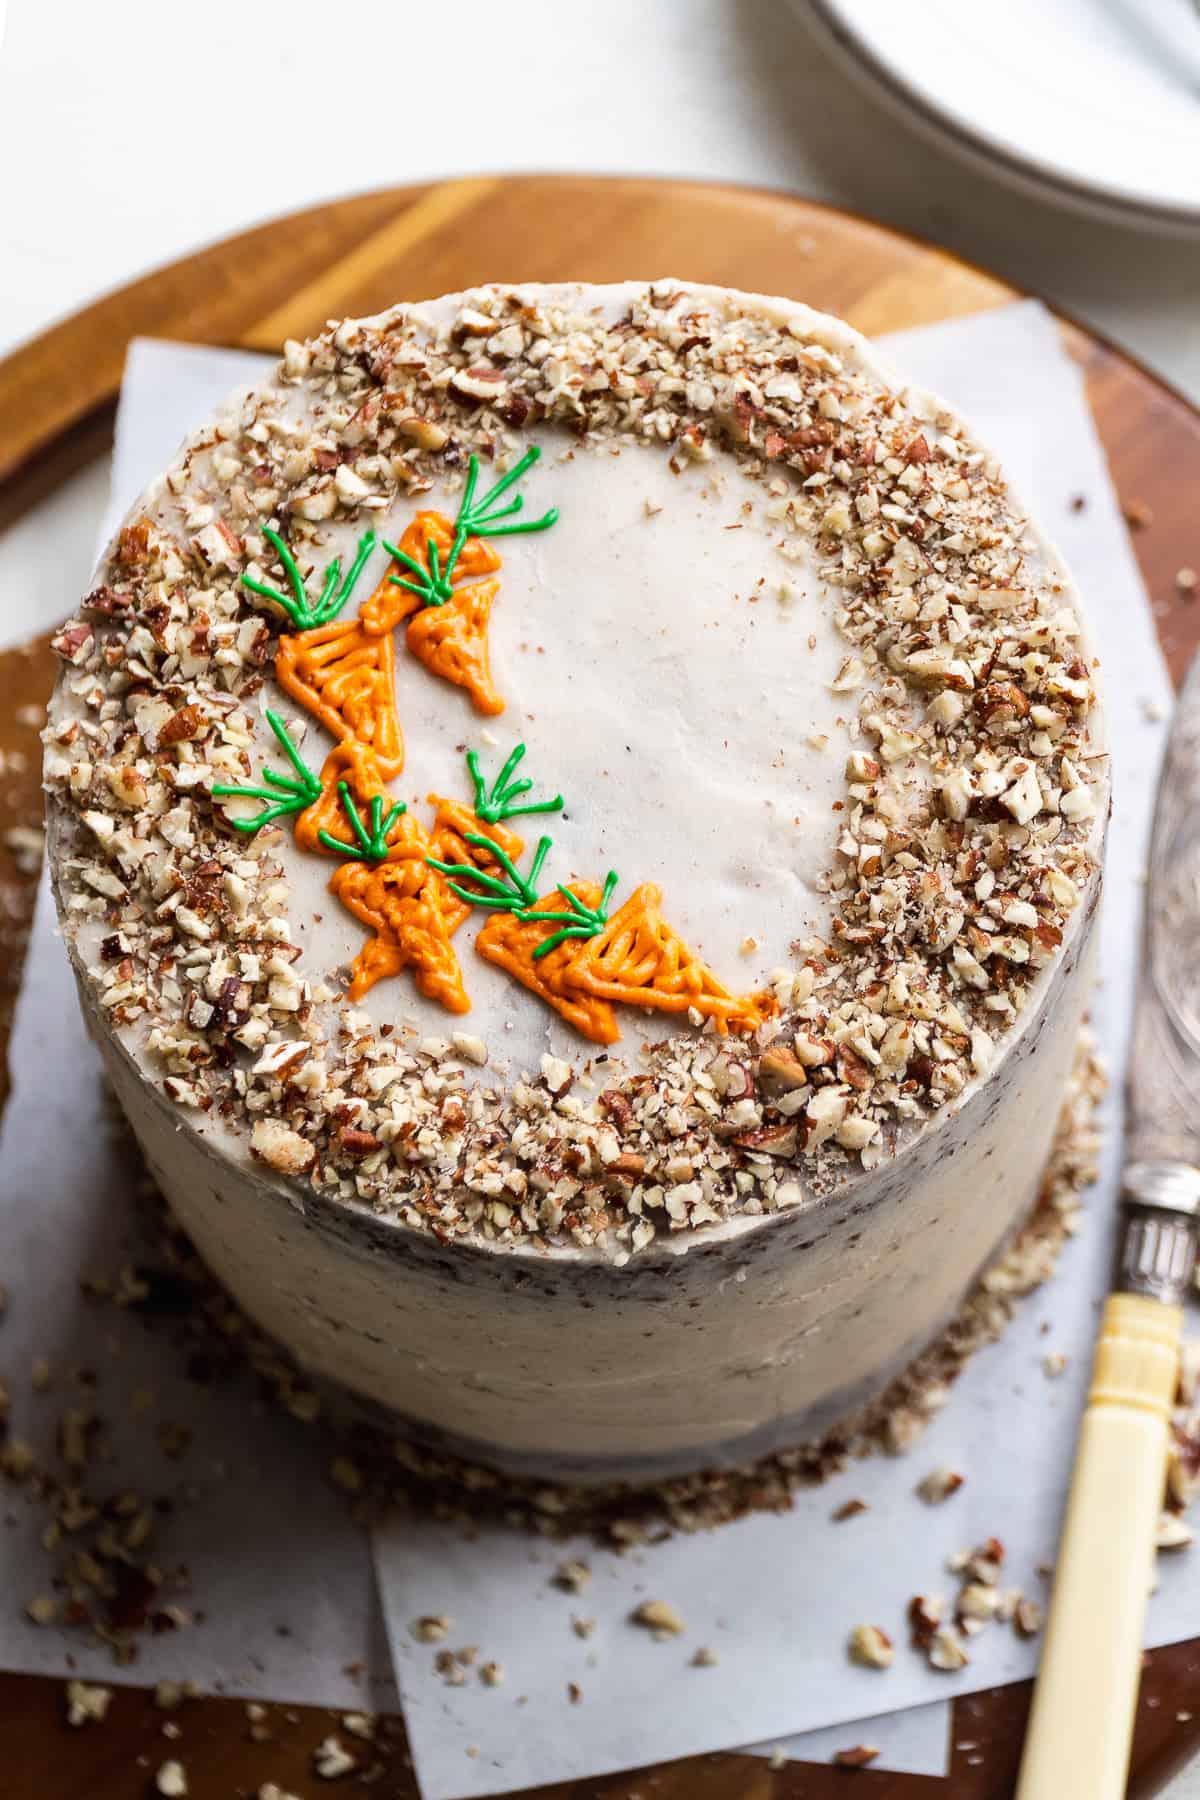 Chocolate carrot cake with carrots piped on top and pecans around the edges.